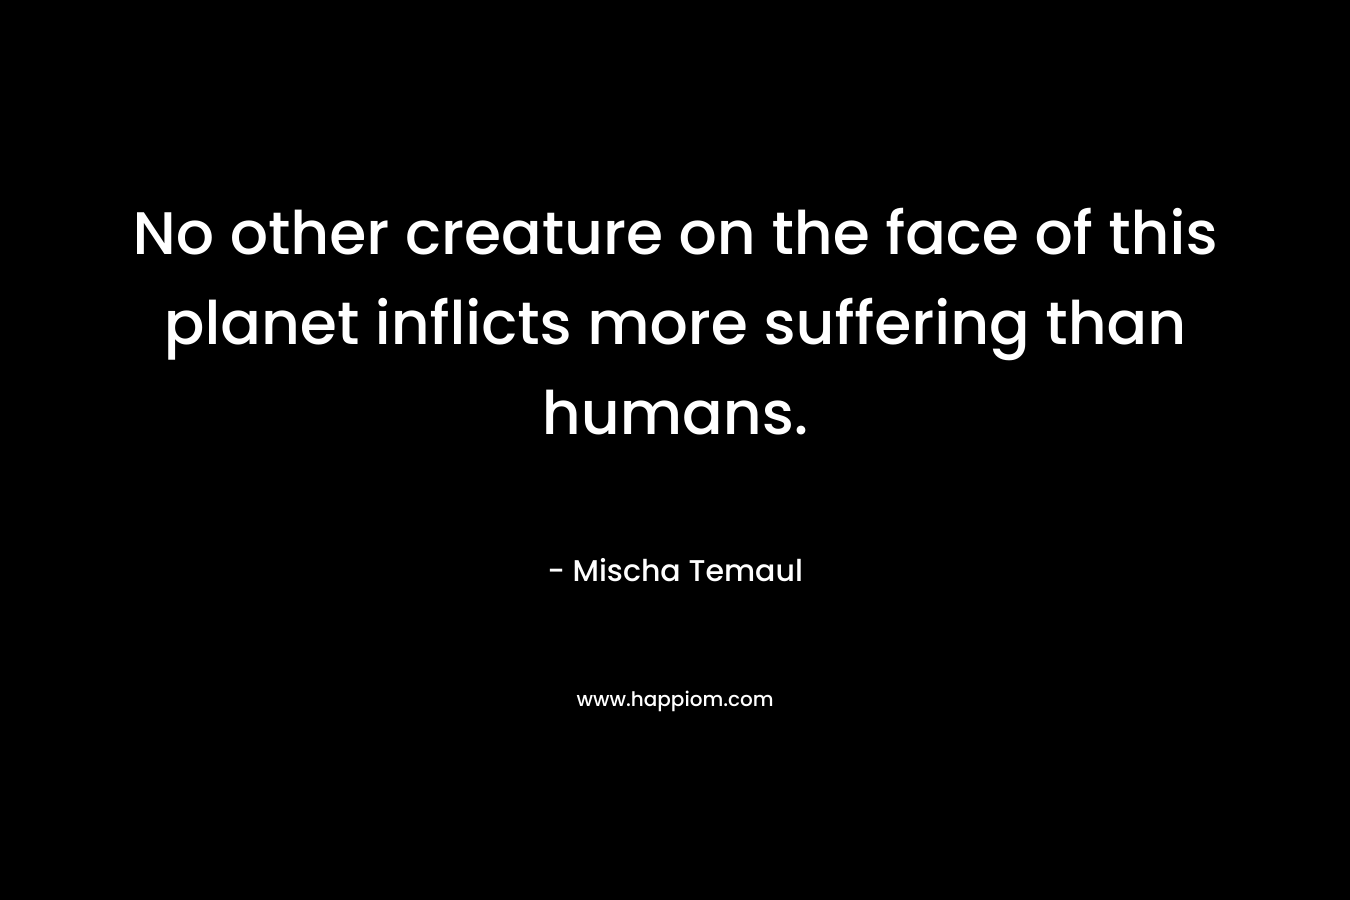 No other creature on the face of this planet inflicts more suffering than humans.